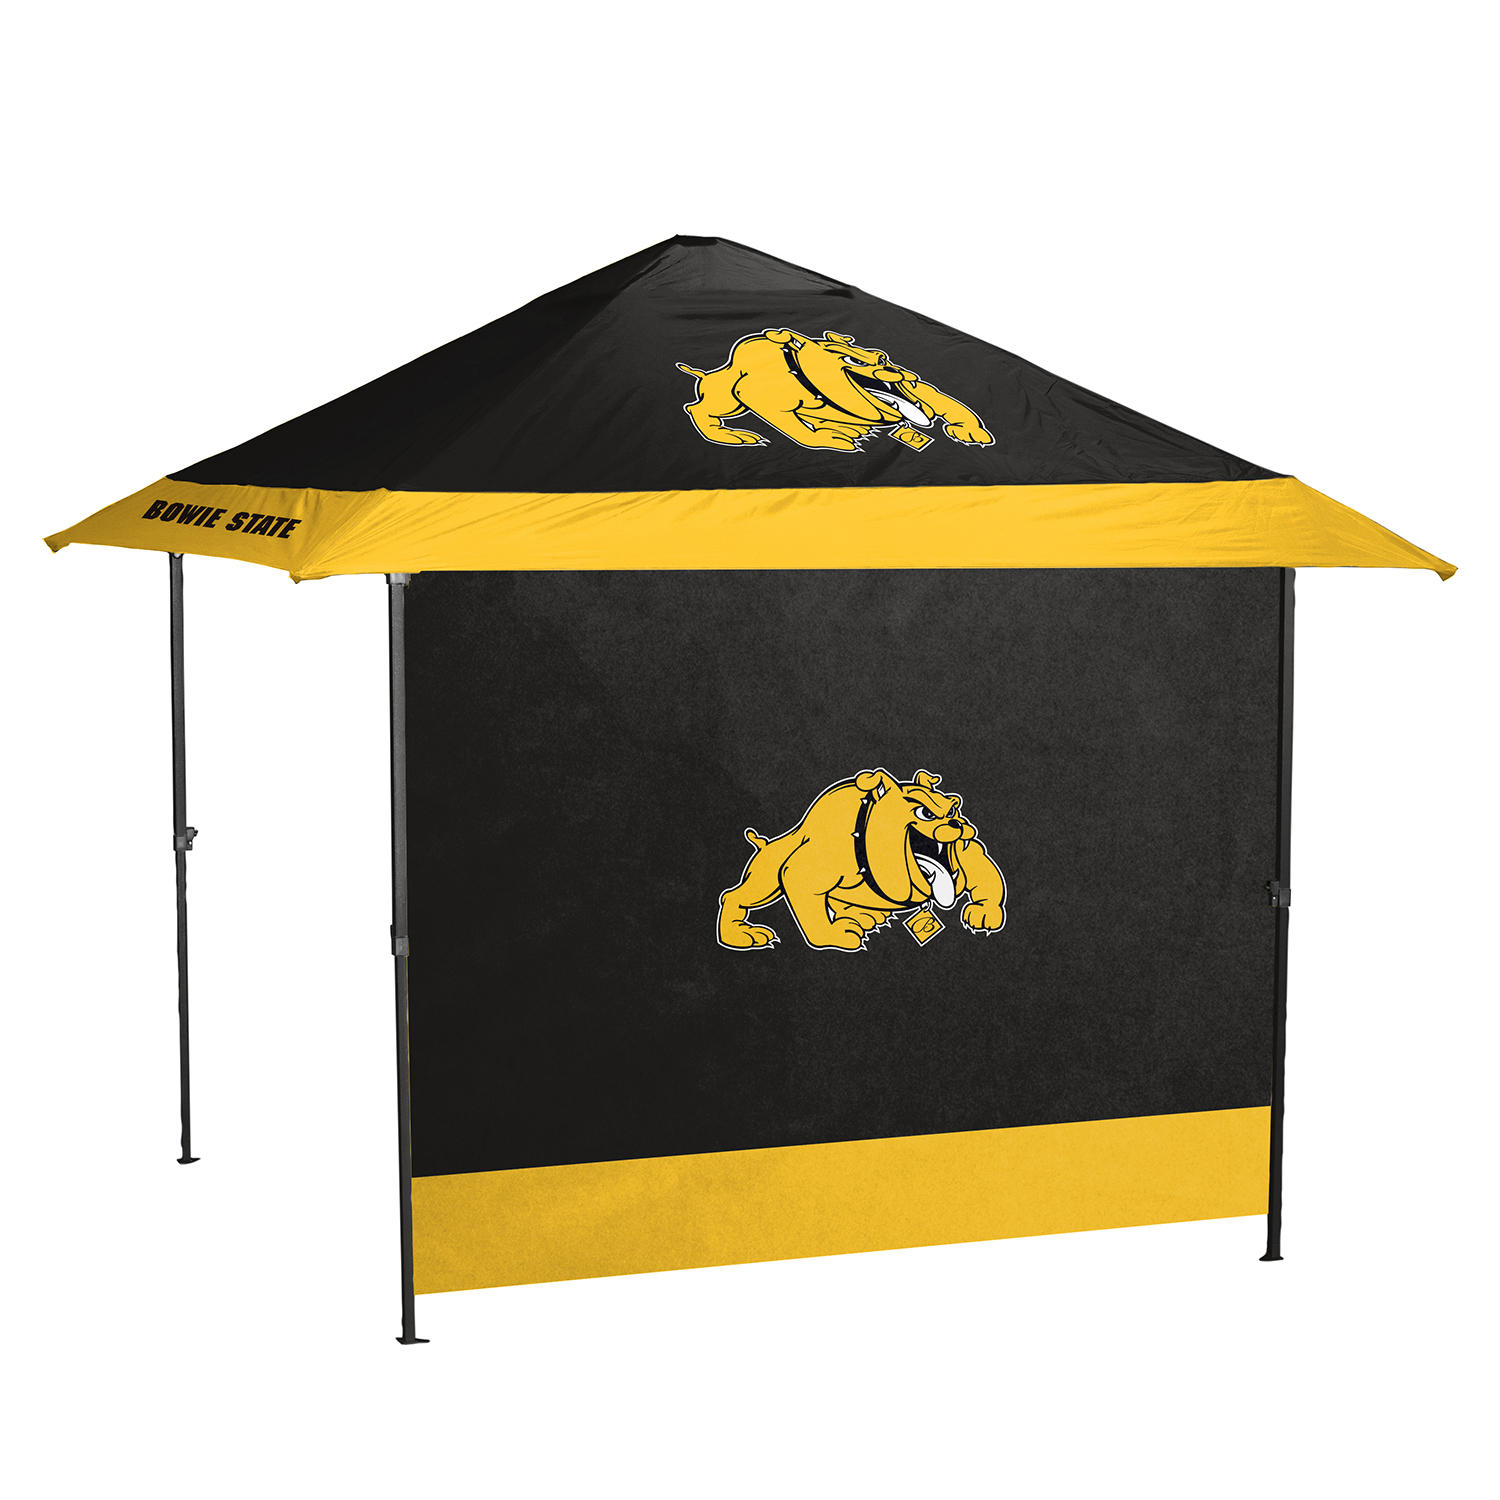 NCAA 12X12 Canopy Bowie State Univ